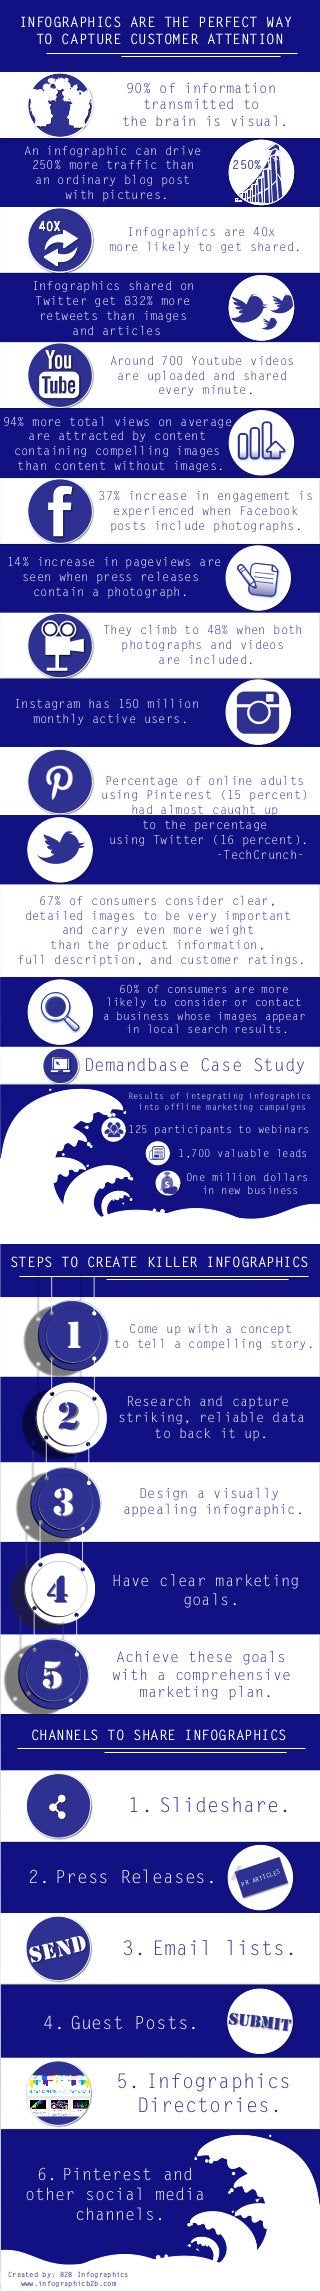 INFOGRAPHICS ARE THE PERFECT WAY
TO CAPTURE CUSTOMER ATTENTION
STEPS TO CREATE KILLER INFOGRAPHICS
CHANNELS TO SHARE INFOGRAPHICS
90% of information
transmitted to
the brain is visual.
Created by: B2B Infographics
www.infographicb2b.com
An infographic can drive
250% more traffic than
an ordinary blog post
with pictures.
Infographics shared on
Twitter get 832% more
retweets than images
and articles
Infographics are 40x
more likely to get shared.
250%
40X
Around 700 Youtube videos
are uploaded and shared
every minute.
94% more total views on average
are attracted by content
containing compelling images
than content without images.
14% increase in pageviews are
seen when press releases
contain a photograph.
They climb to 48% when both
photographs and videos
are included.
37% increase in engagement is
experienced when Facebook
posts include photographs.
Demandbase Case Study
Results of integrating infographics
into offline marketing campaigns
1,700 valuable leads
One million dollars
in new business
125 participants to webinars
Come up with a concept
to tell a compelling story.
Design a visually
appealing infographic.
Achieve these goals
with a comprehensive
marketing plan.
1. Slideshare.
Have clear marketing
goals.
Research and capture
striking, reliable data
to back it up.
60% of consumers are more
likely to consider or contact
a business whose images appear
in local search results.
2. Press Releases.
4. Guest Posts.
6. Pinterest and
other social media
channels.
5. Infographics
Directories.
3. Email lists.
Percentage of online adults
using Pinterest (15 percent)
had almost caught up
to the percentage
using Twitter (16 percent).
-TechCrunch-
Instagram has 150 million
monthly active users.
67% of consumers consider clear,
detailed images to be very important
and carry even more weight
than the product information,
full description, and customer ratings.
11
2
33
4
55
2
4
submit
send
PR ARTICLES
 